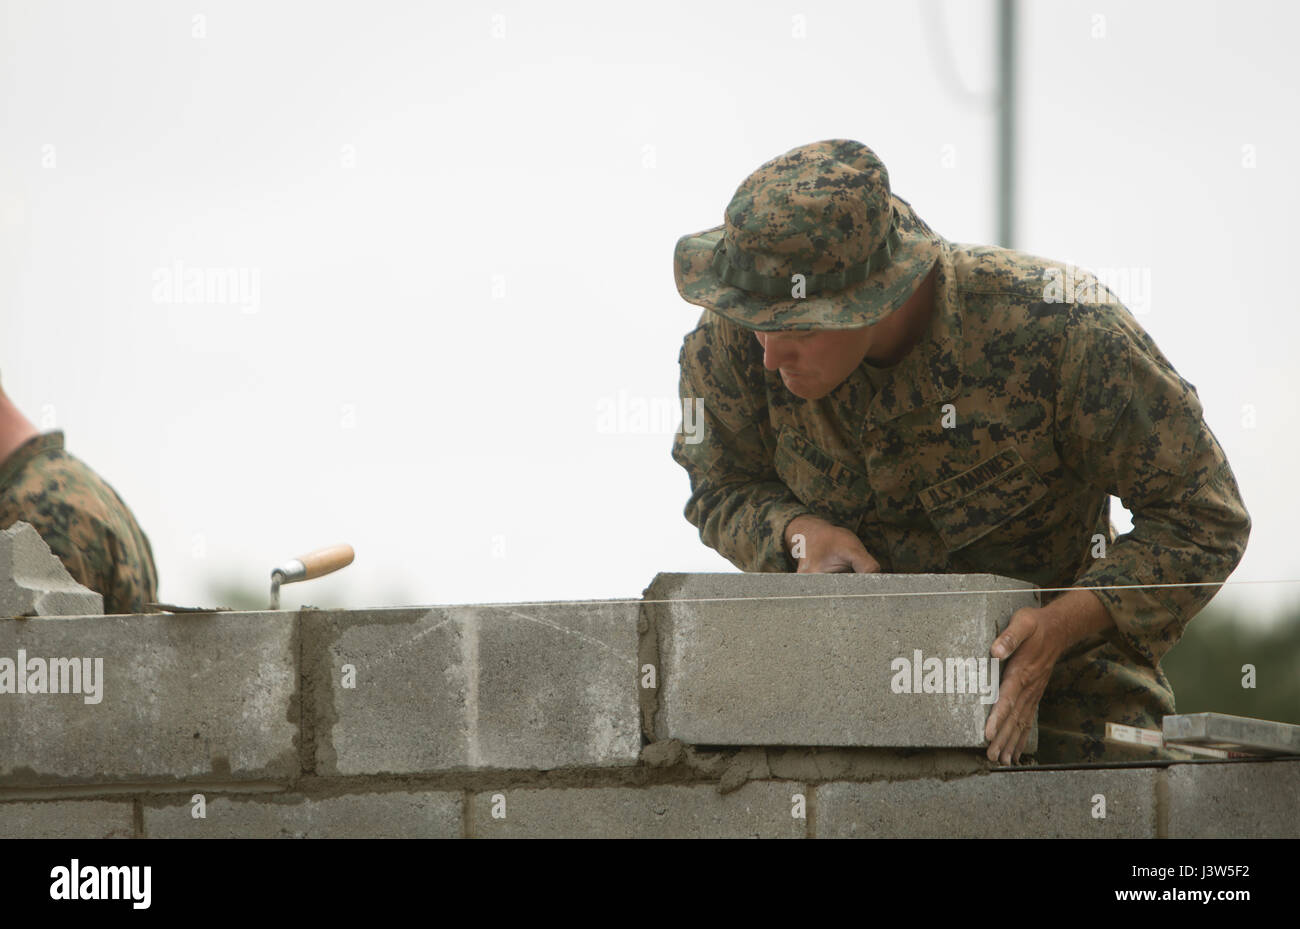 CAMP LEJEUNE, N.C.- Sgt. Chad R. Stanley, a heavy equipment foreman with the Logistics Combat Element, Special Purpose Marine Air-Ground Task Force - Southern Command, lays a concrete block while building the wall of a simulated schoolhouse during General Exercise 2 at Marine Corps Base Camp Lejeune, North Carolina, April 28, 2017. The Marines simulated construction of a schoolhouse in preparation for infrastructure improvement projects scheduled during their upcoming deployment to Central America. (U.S. Marine Corps photo by Sgt. Ian Leones) Stock Photo